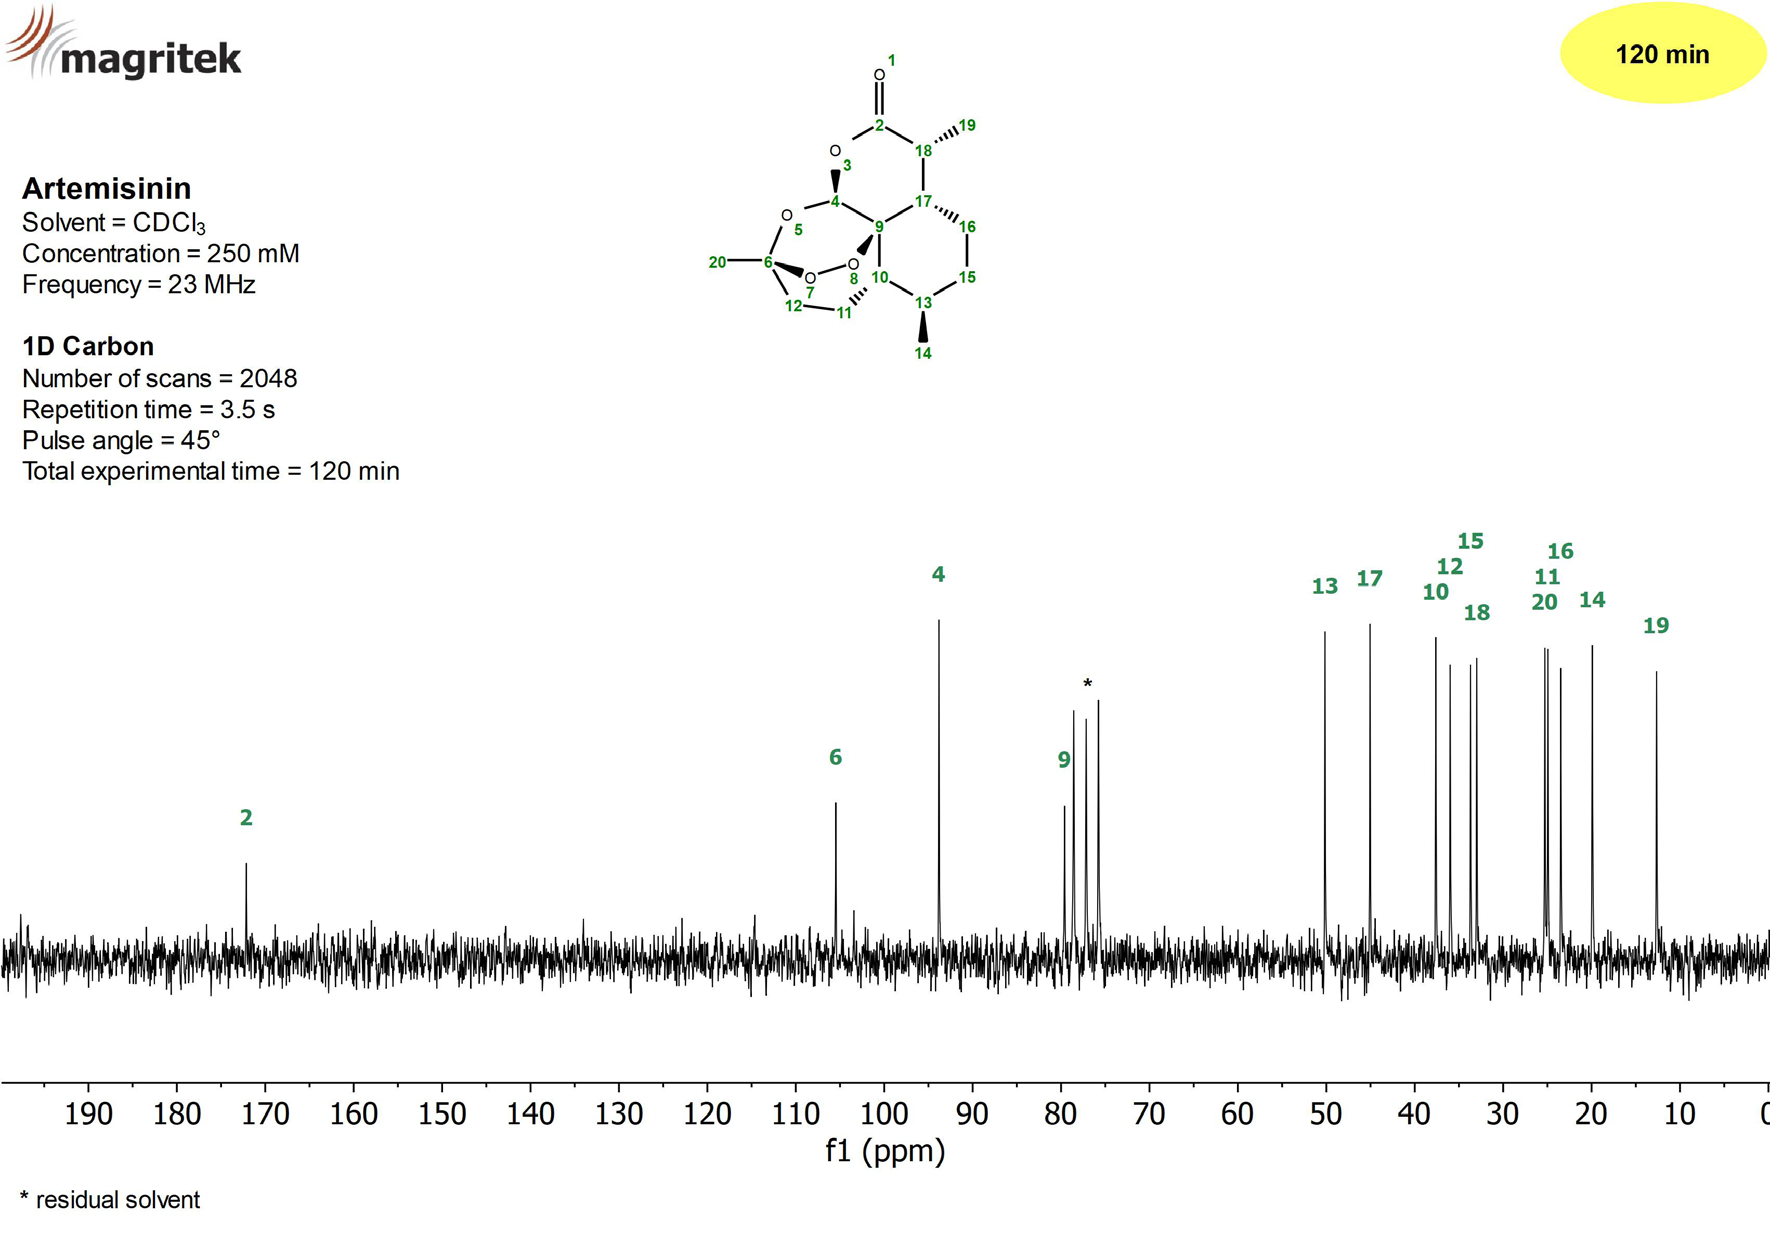 13C NMR spectrum of a 250 mM Artemisinin sample in CDCl3 measured on a Spinsolve 90 MHz system in 120 minutes.